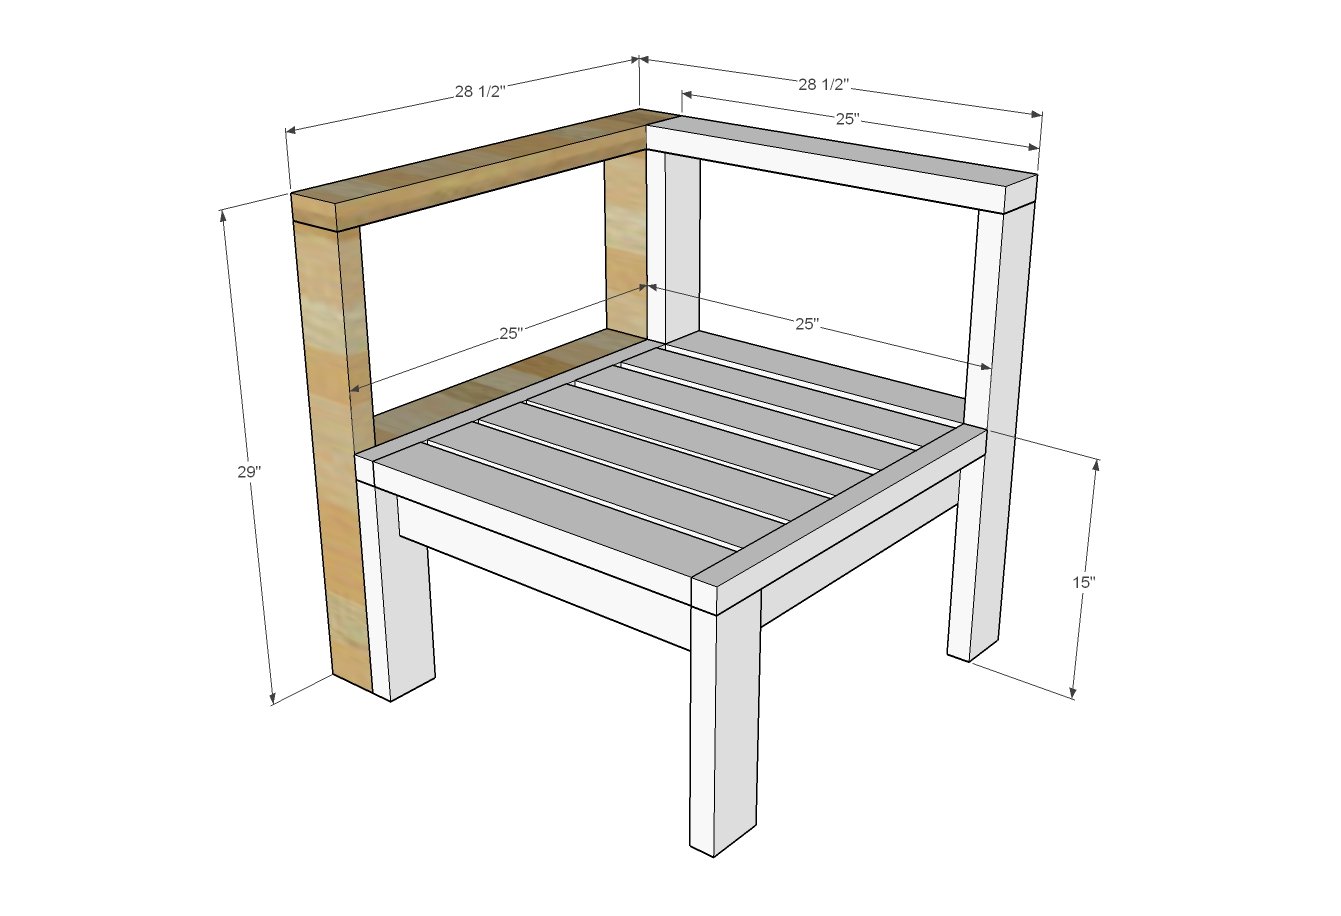 dimensions diagram for outdoor sectional piece with corner